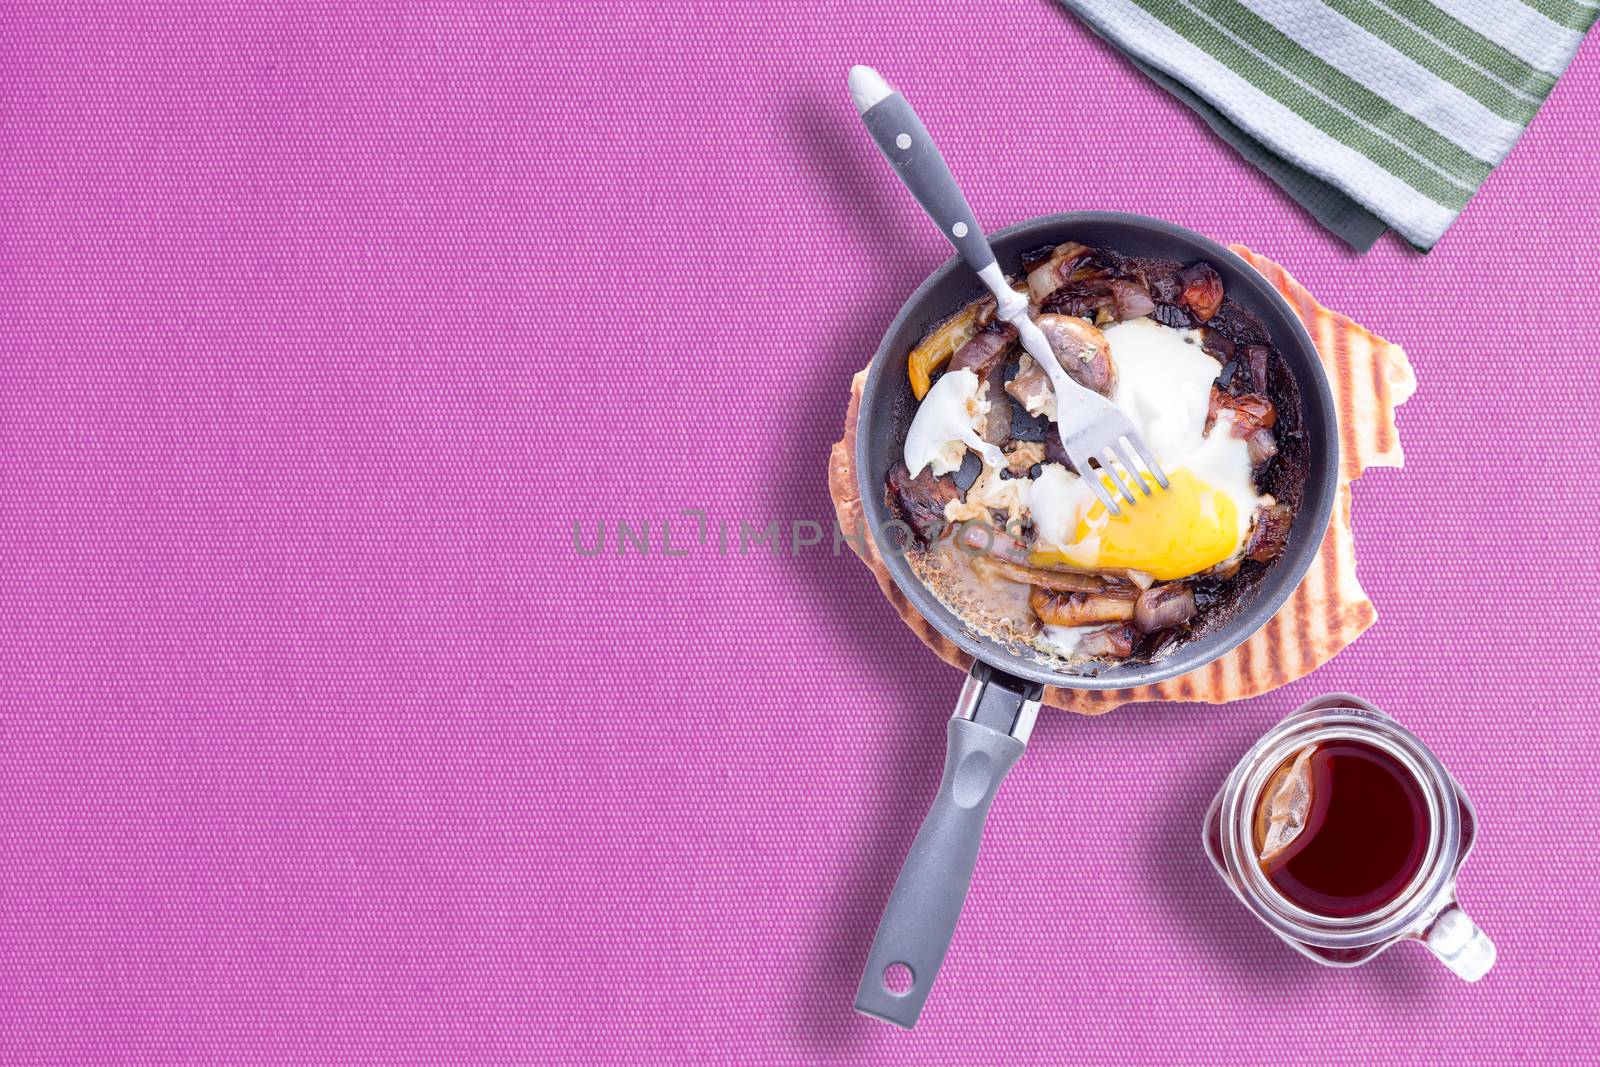 Sunny Side up Omelette on Violet Color Table Cloth with a Mason Cup Hot Tea, Copy Space Left at Left